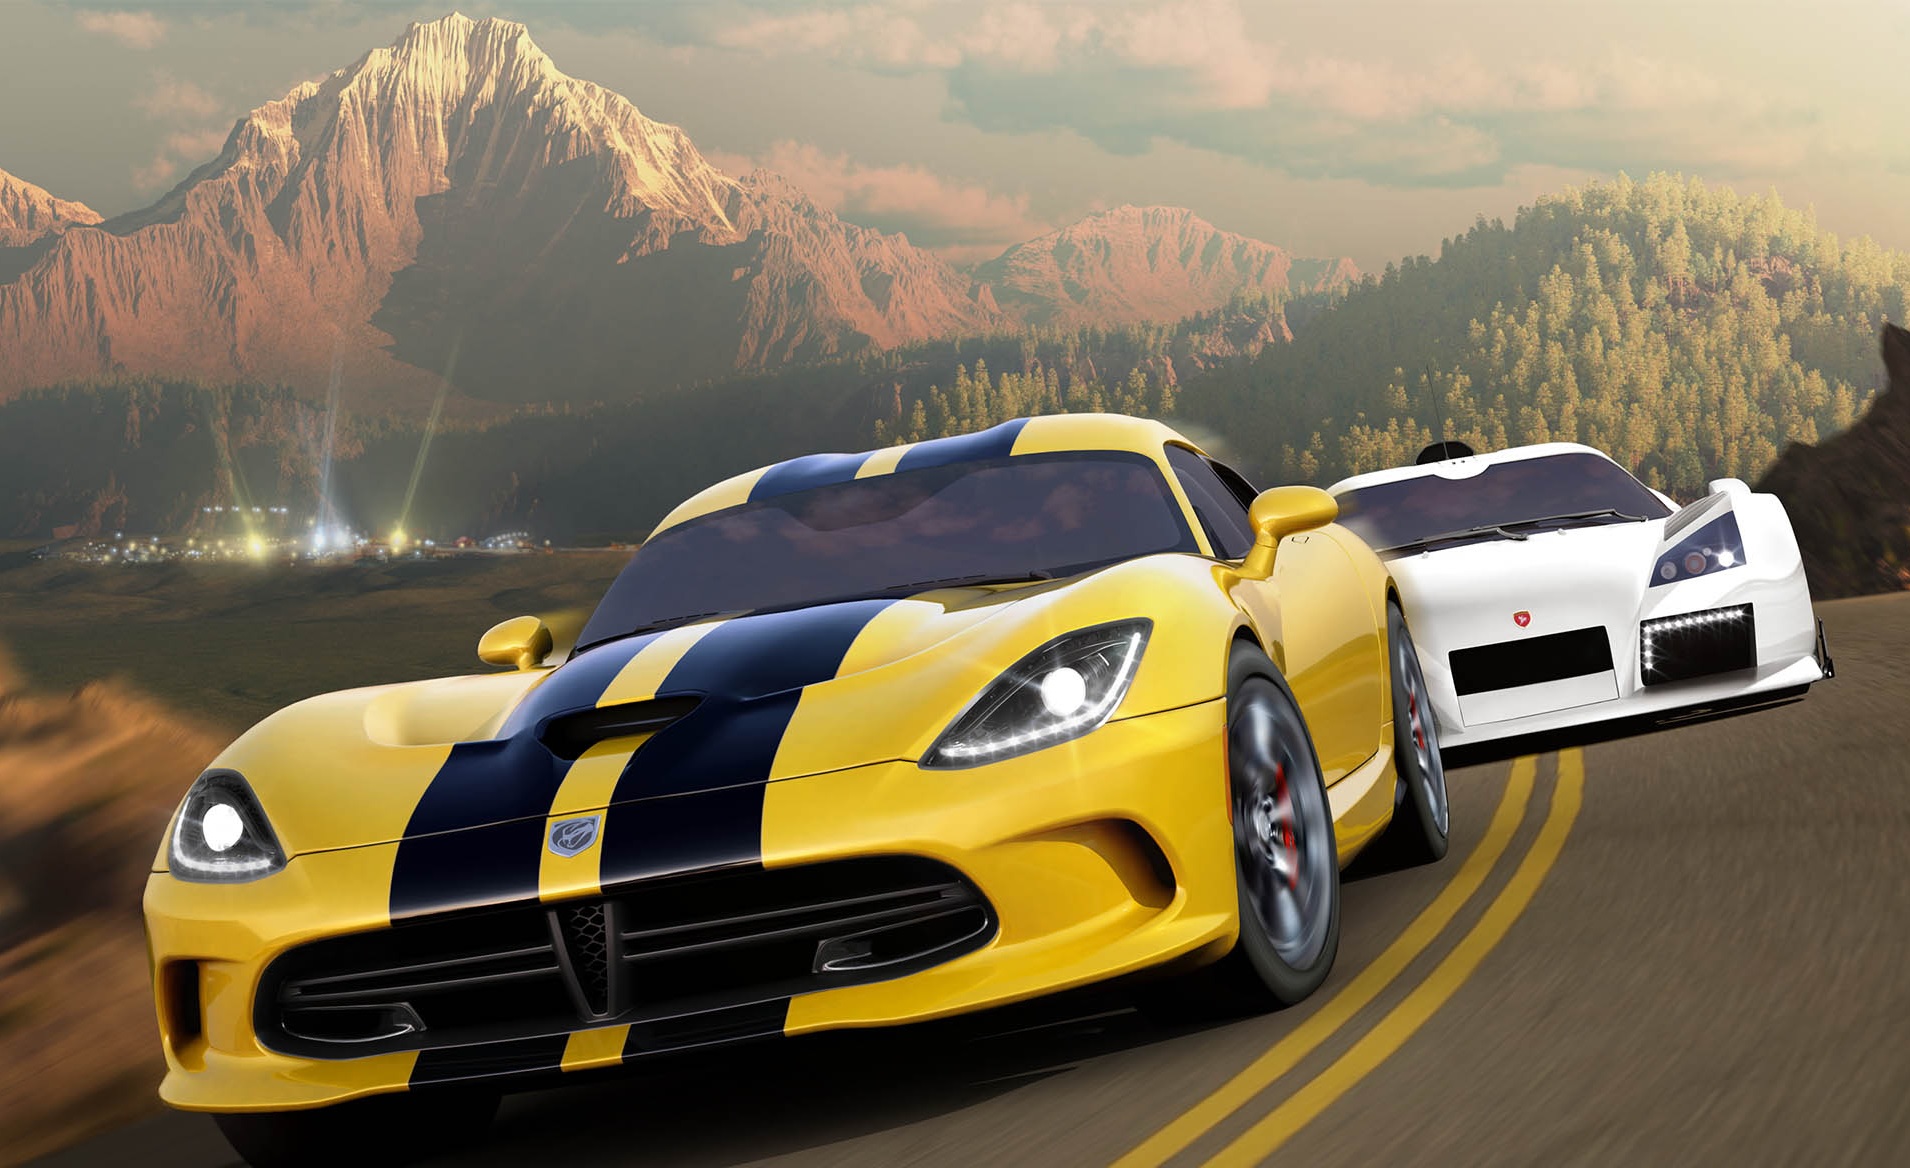 Forza Horizon 2 Xbox One Review: One of the All-Time Great Racers